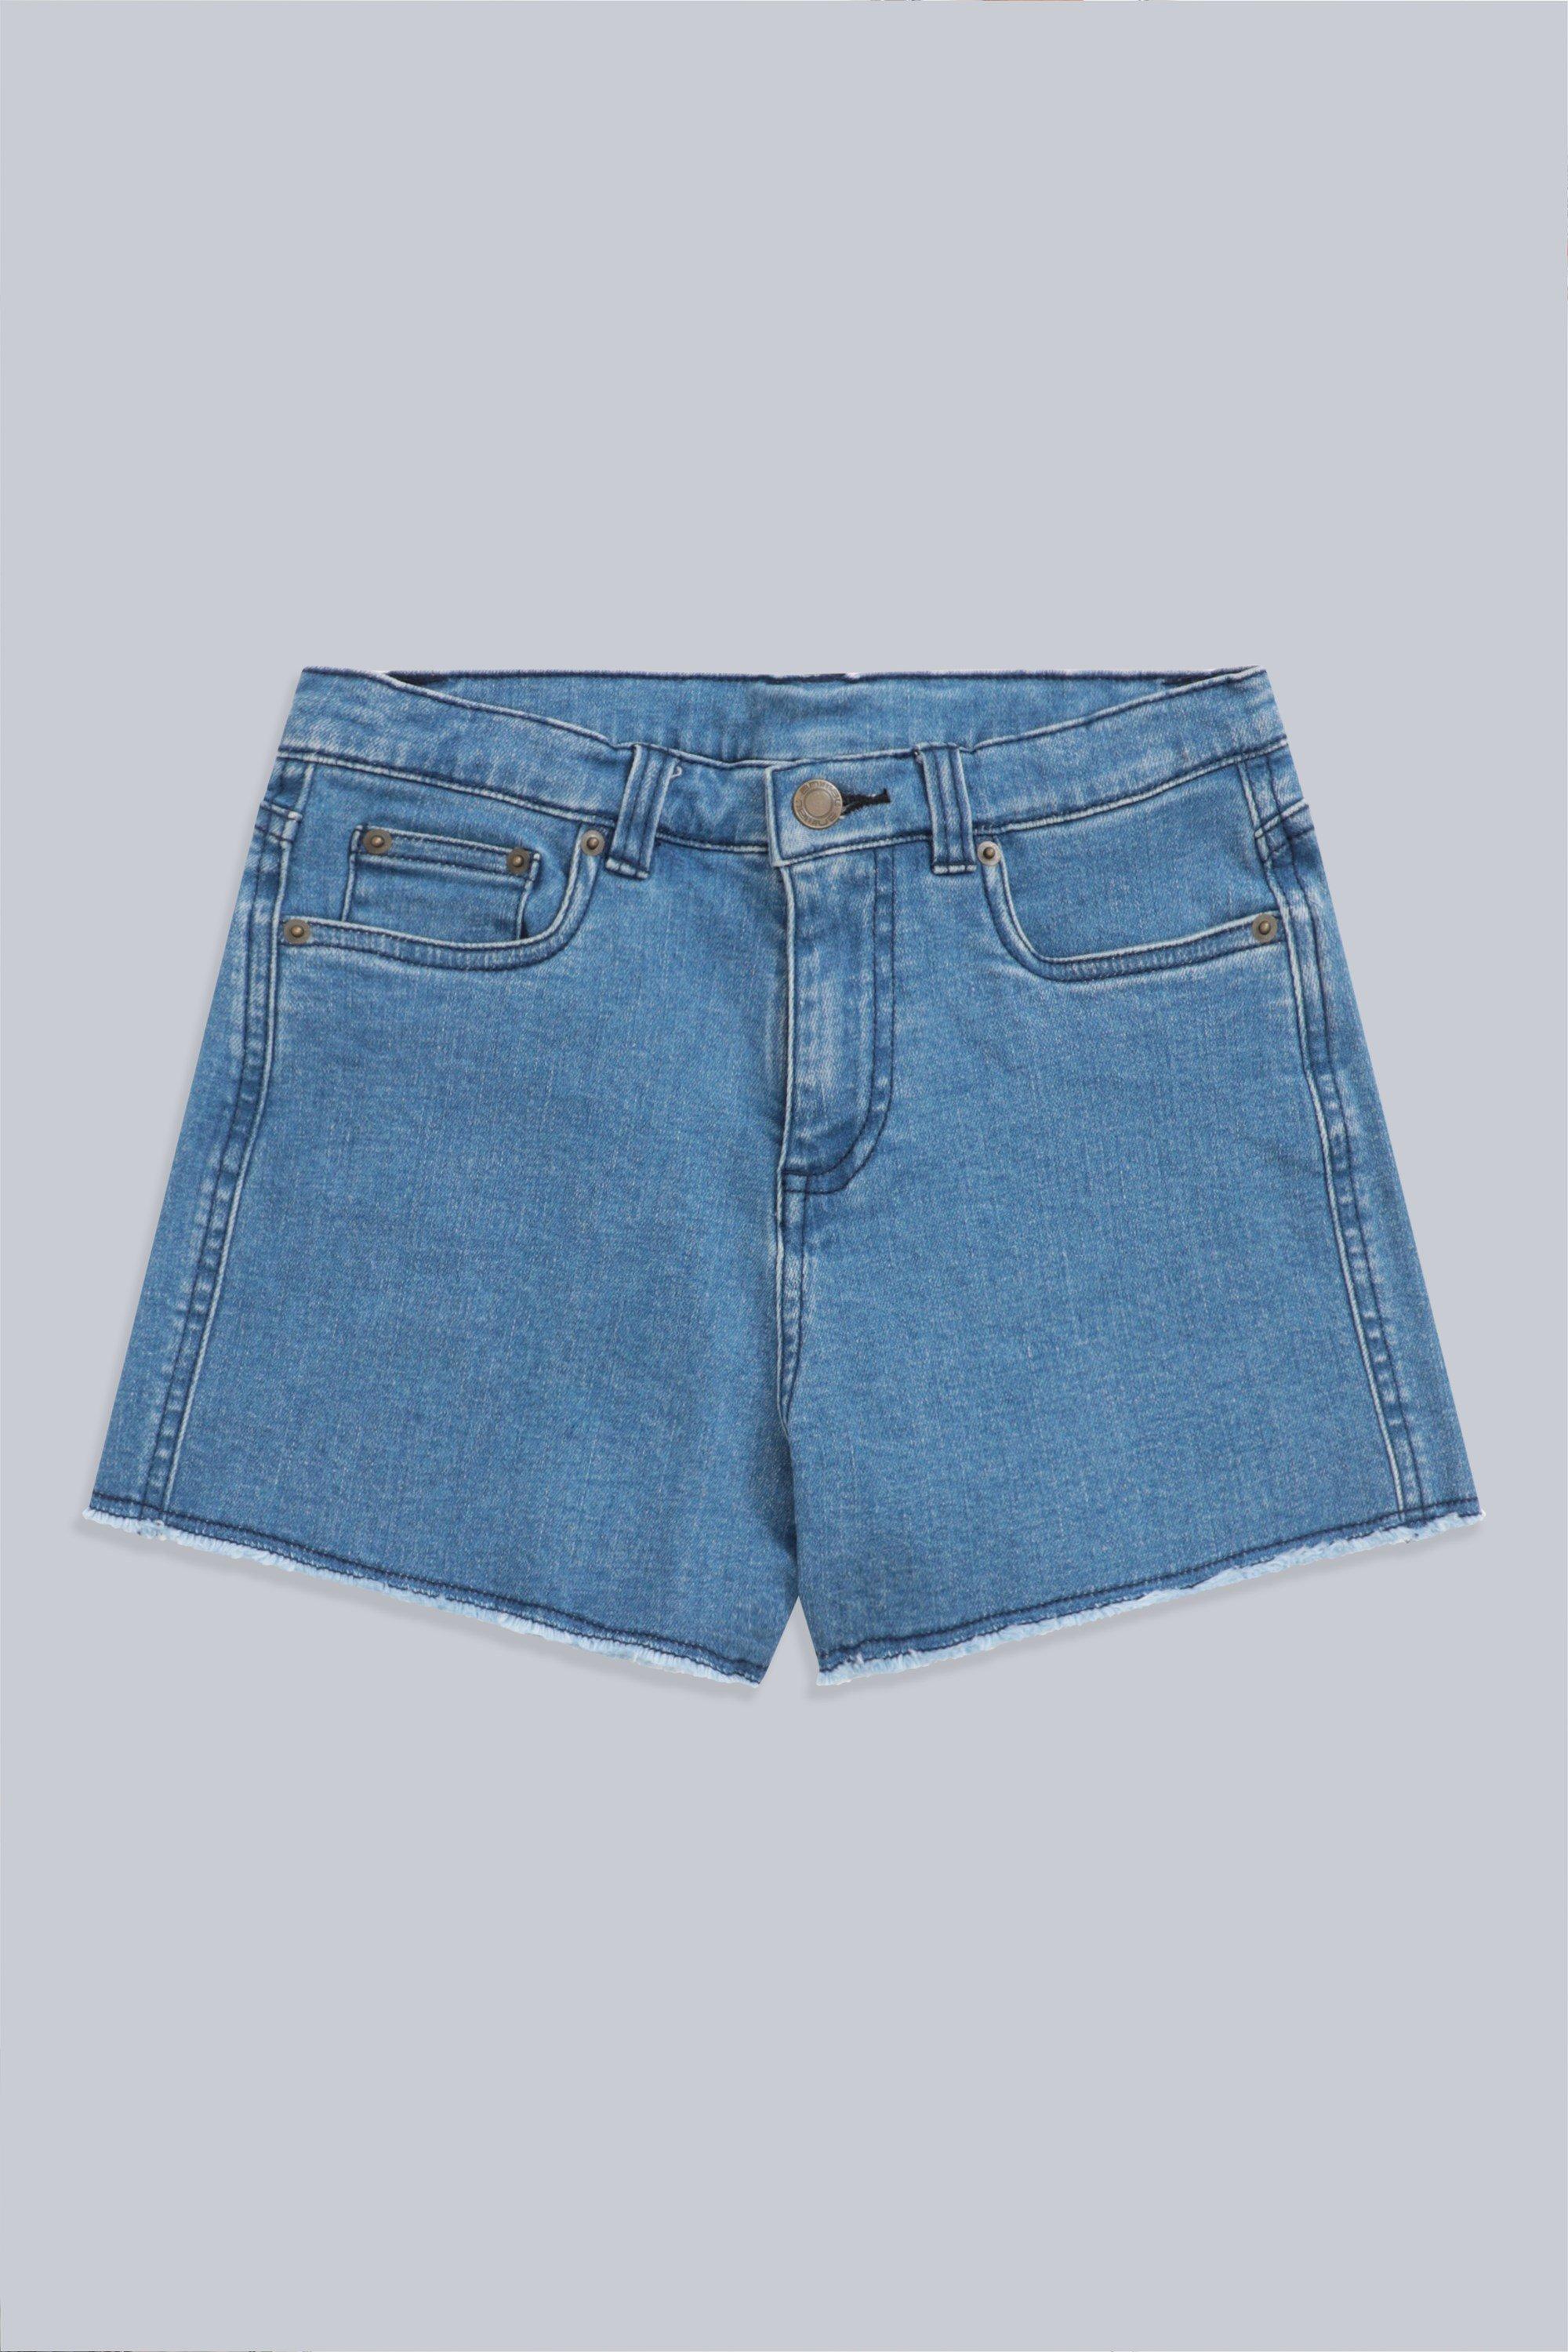 ’Sophia’ Lightweight Breathable Casual Summer Soft Cotton Shorts